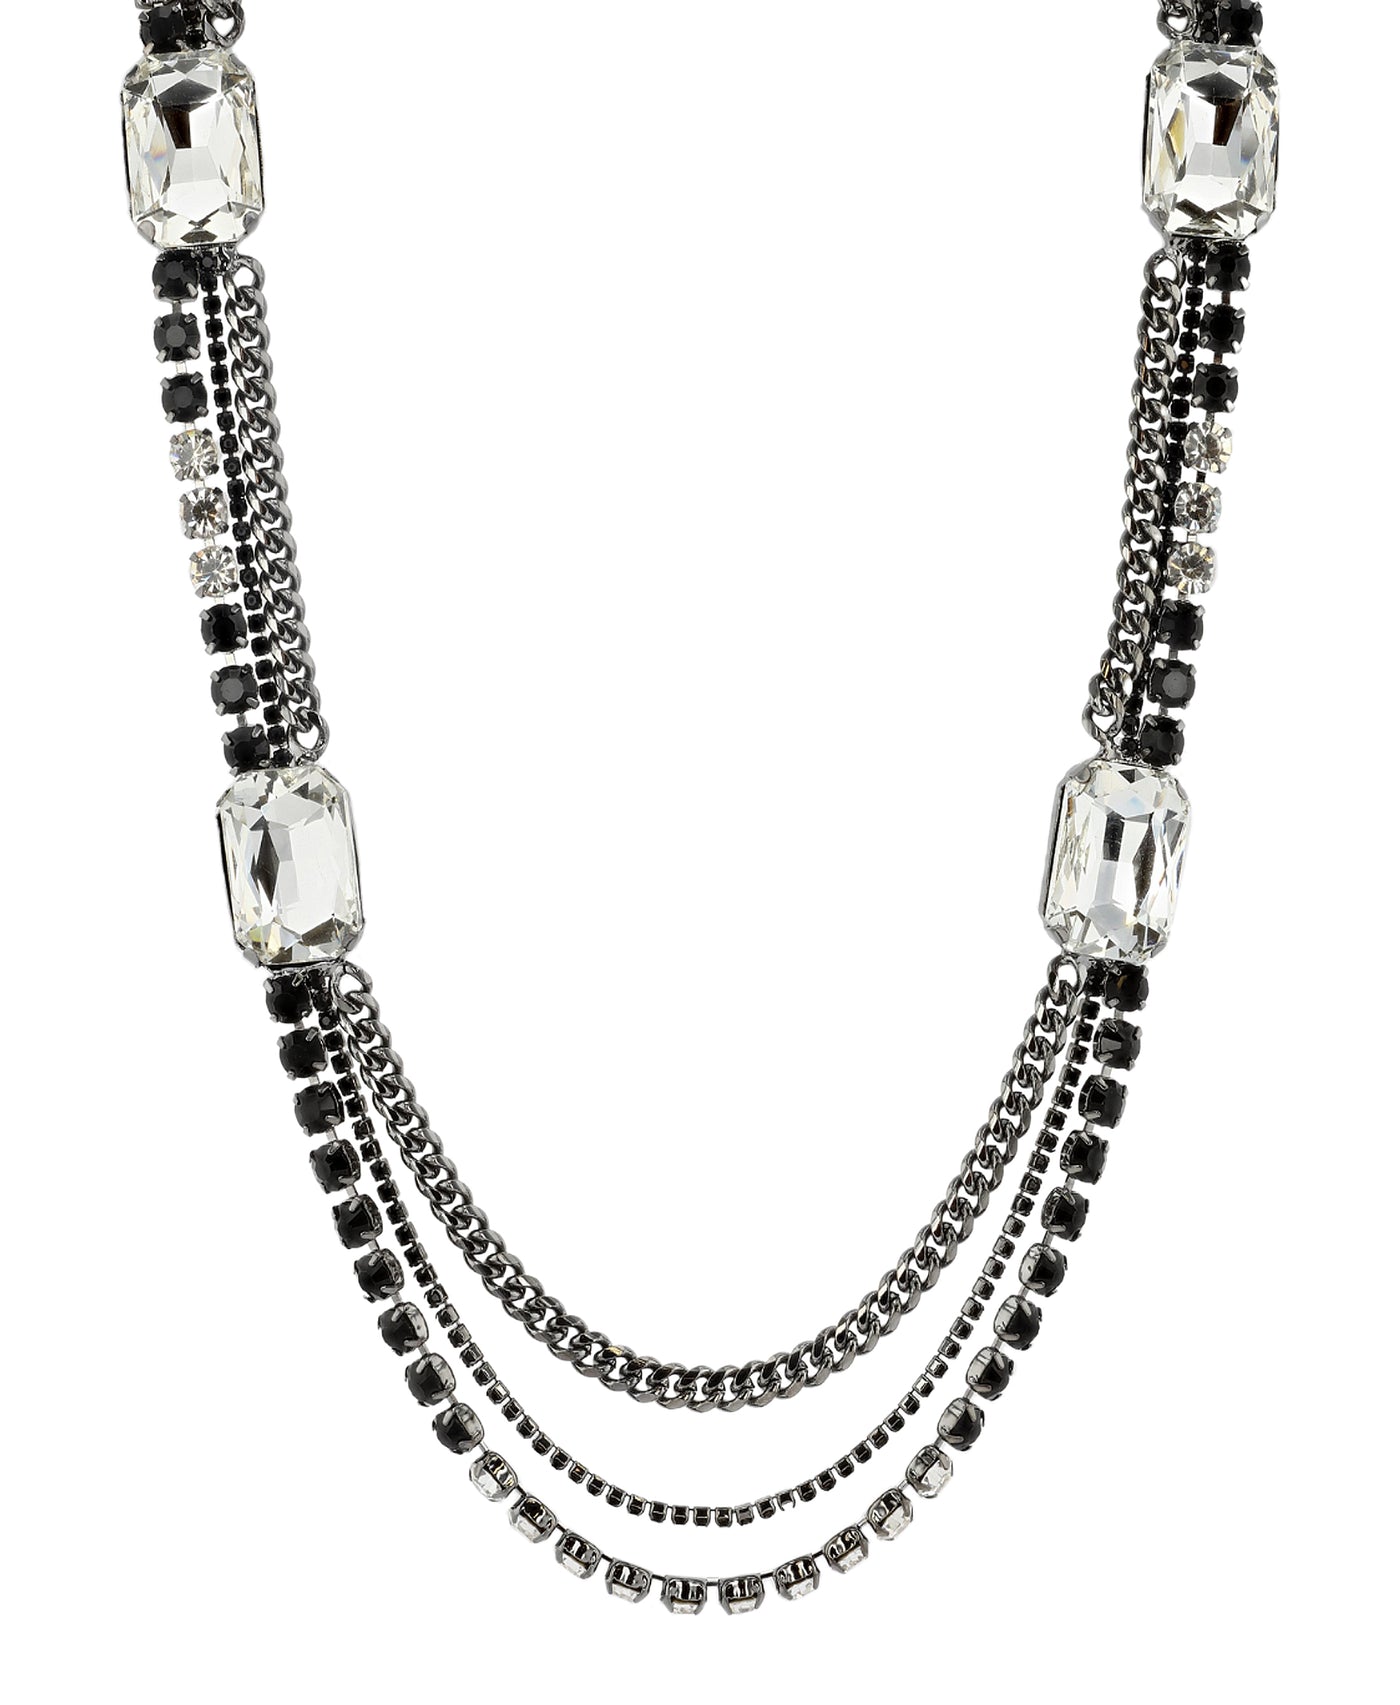 Multi Strand Long Necklace w/ Jewels image 1